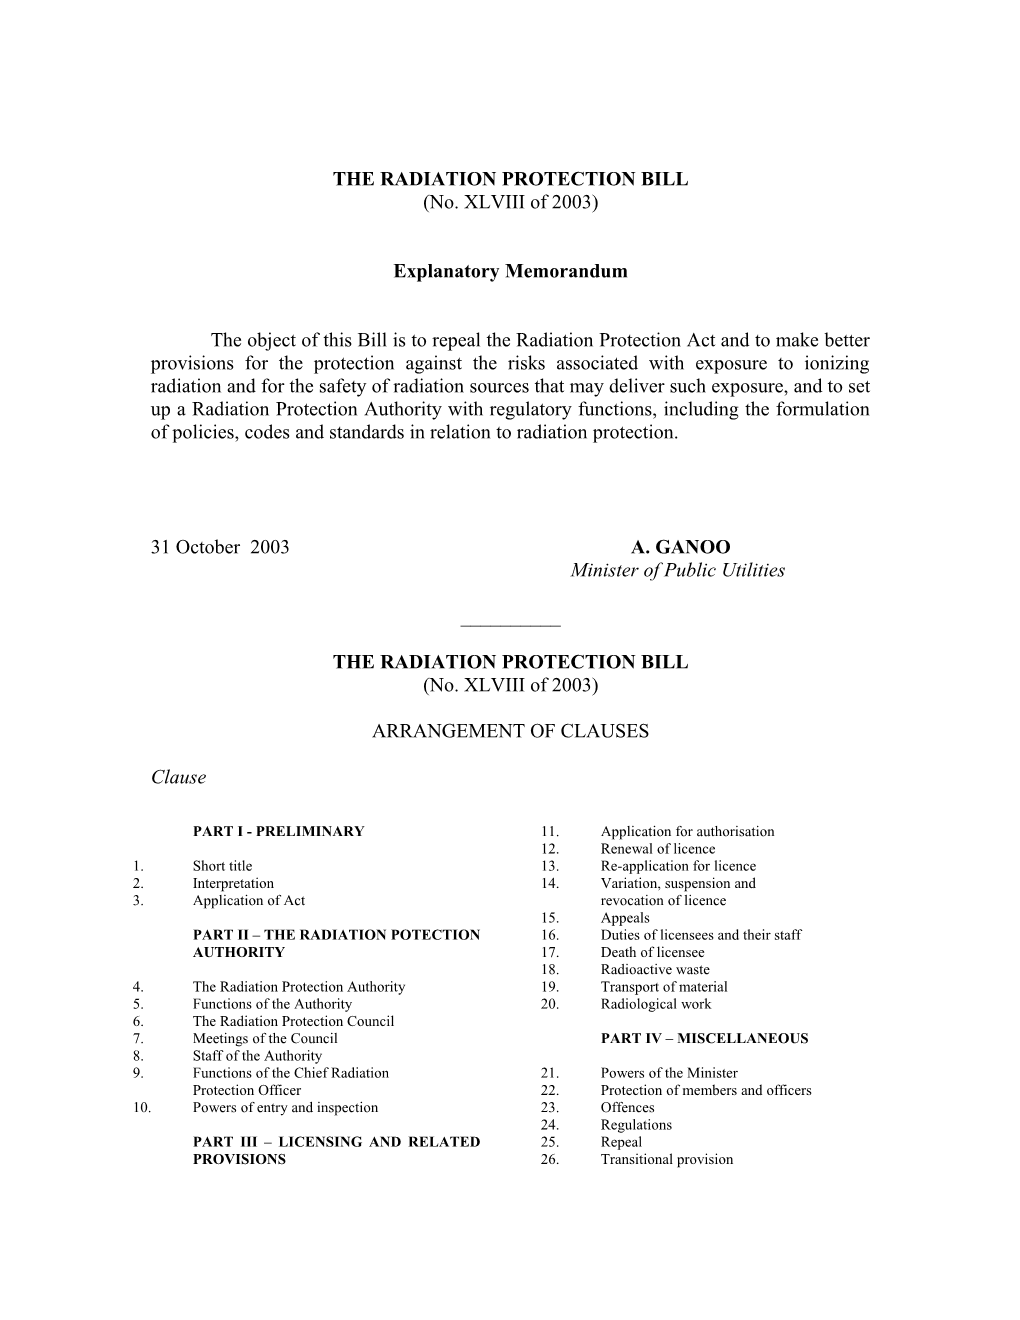 The Radiation Protection Bill